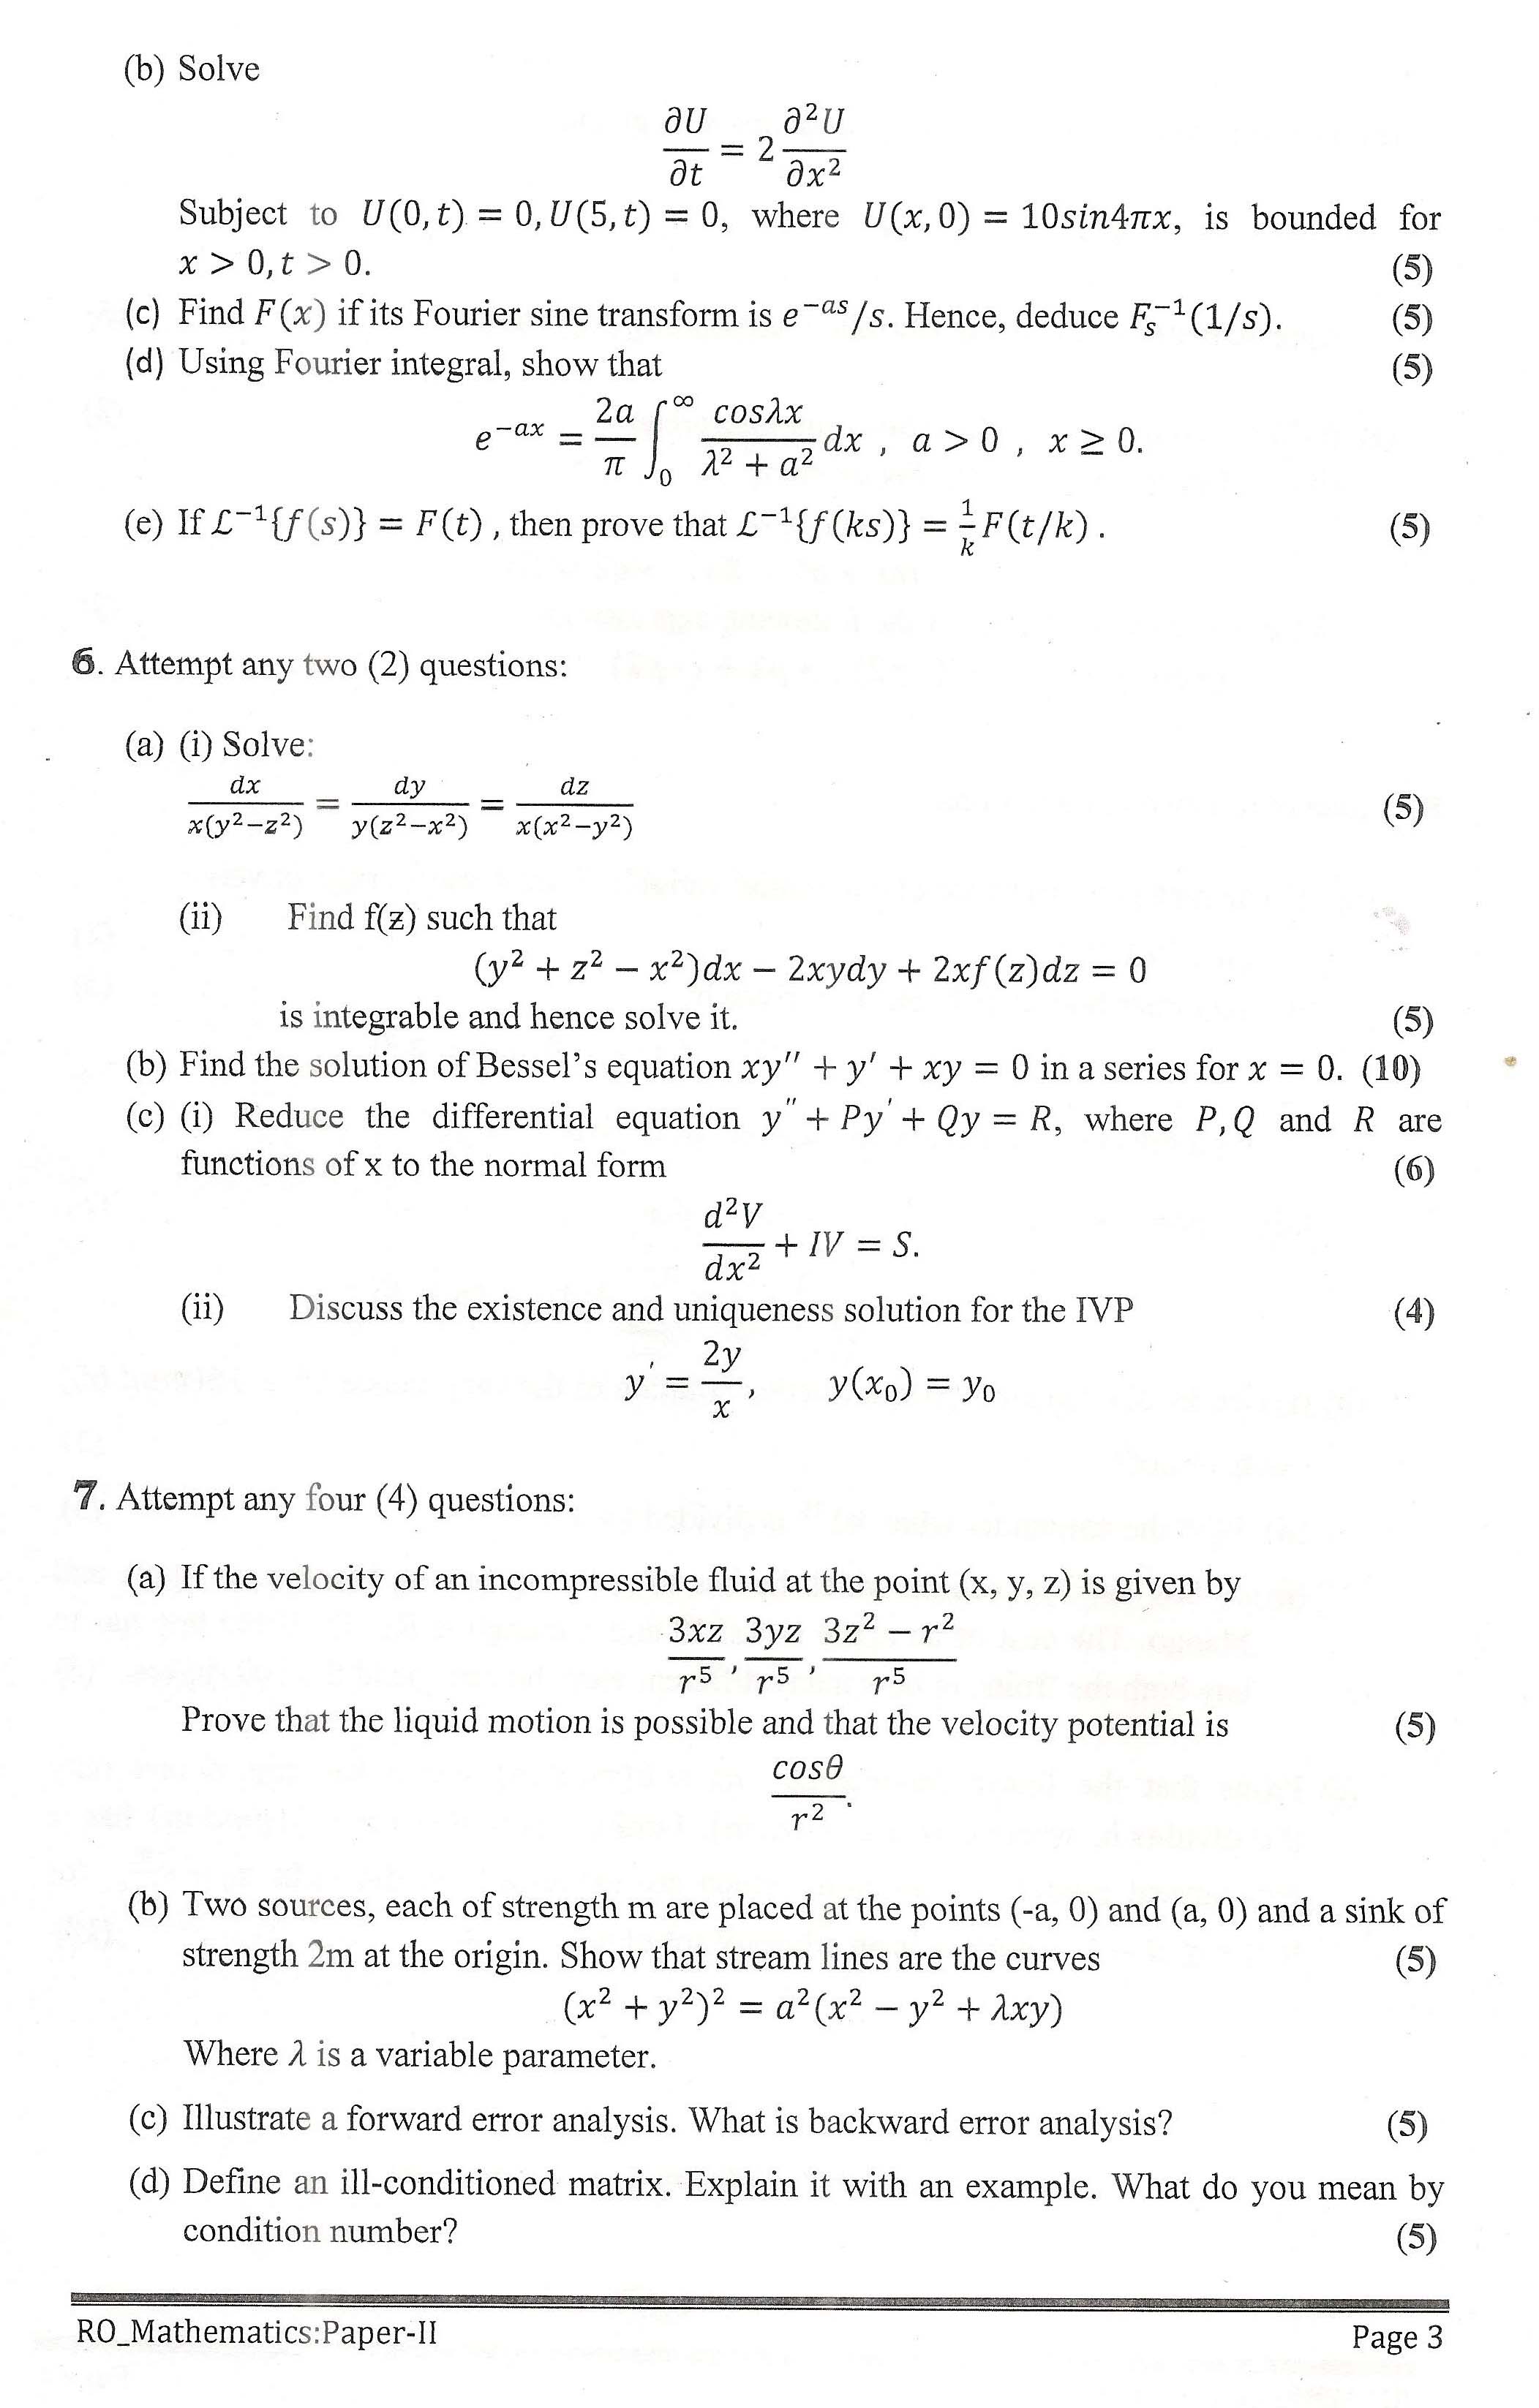 APPSC Research Officer Mathematics Paper II Exam Question Paper 2014 3